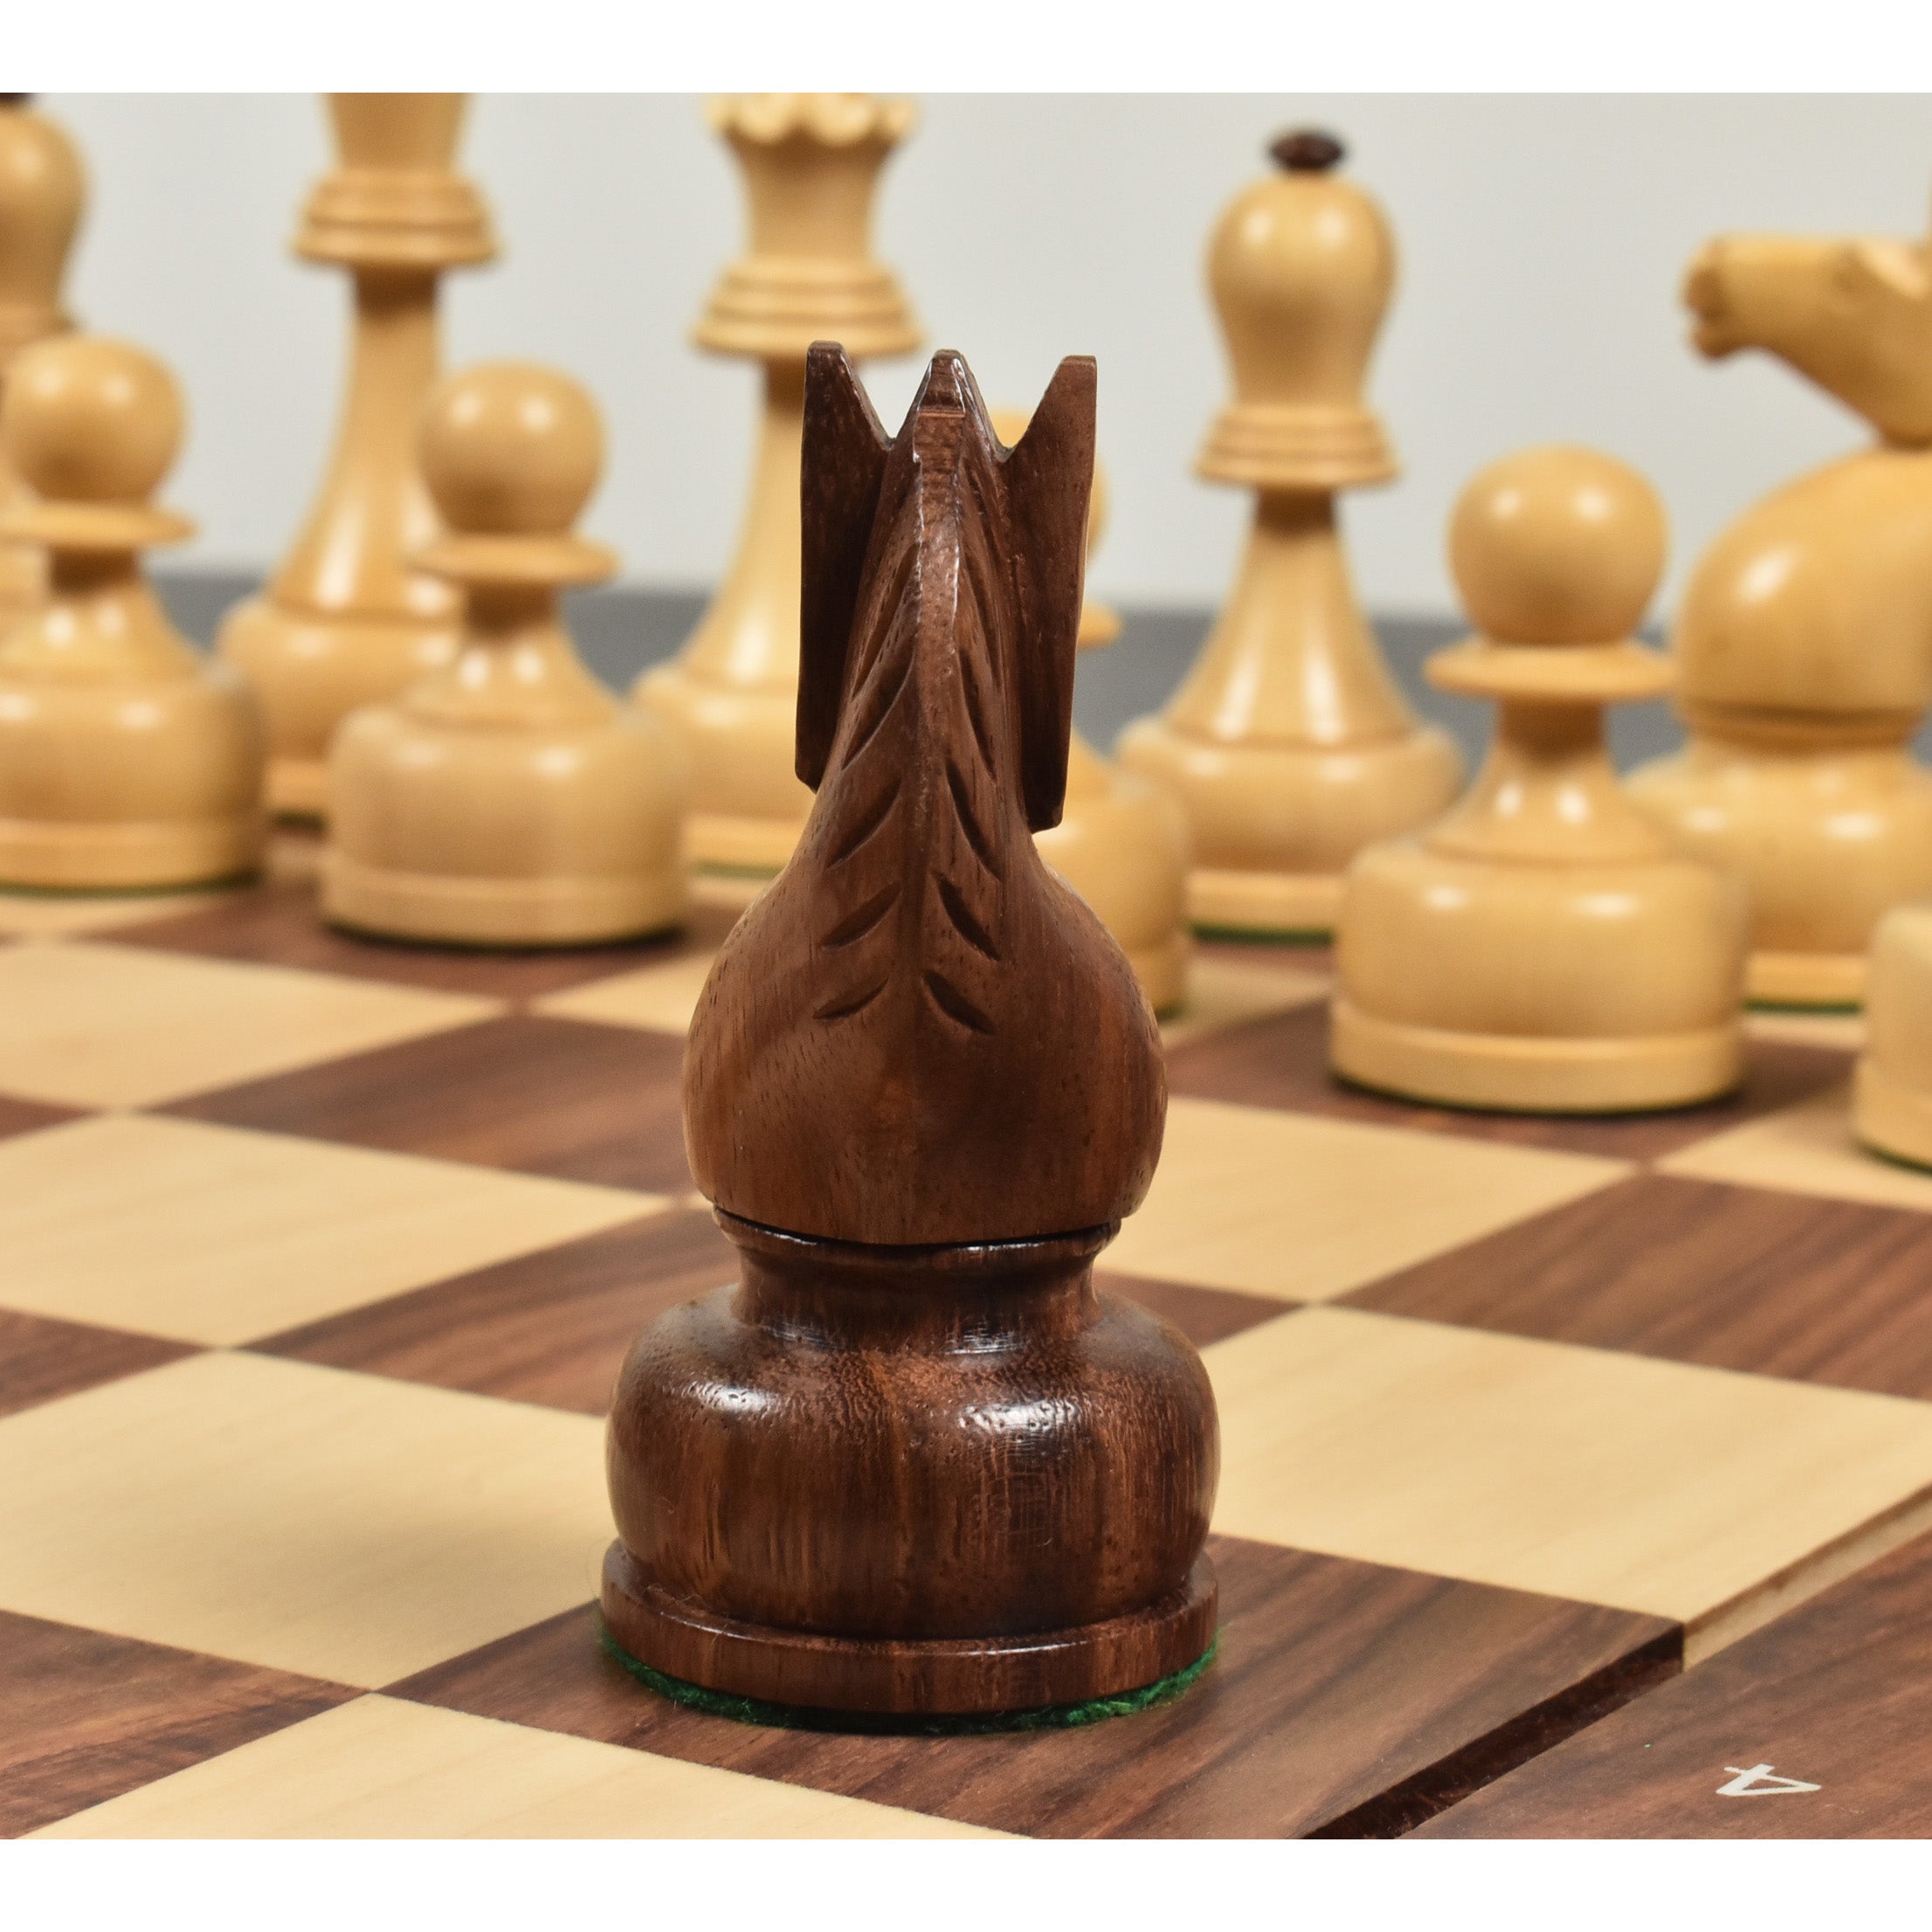 Soviet Championship Tal Chess Pieces- Golden Rosewood